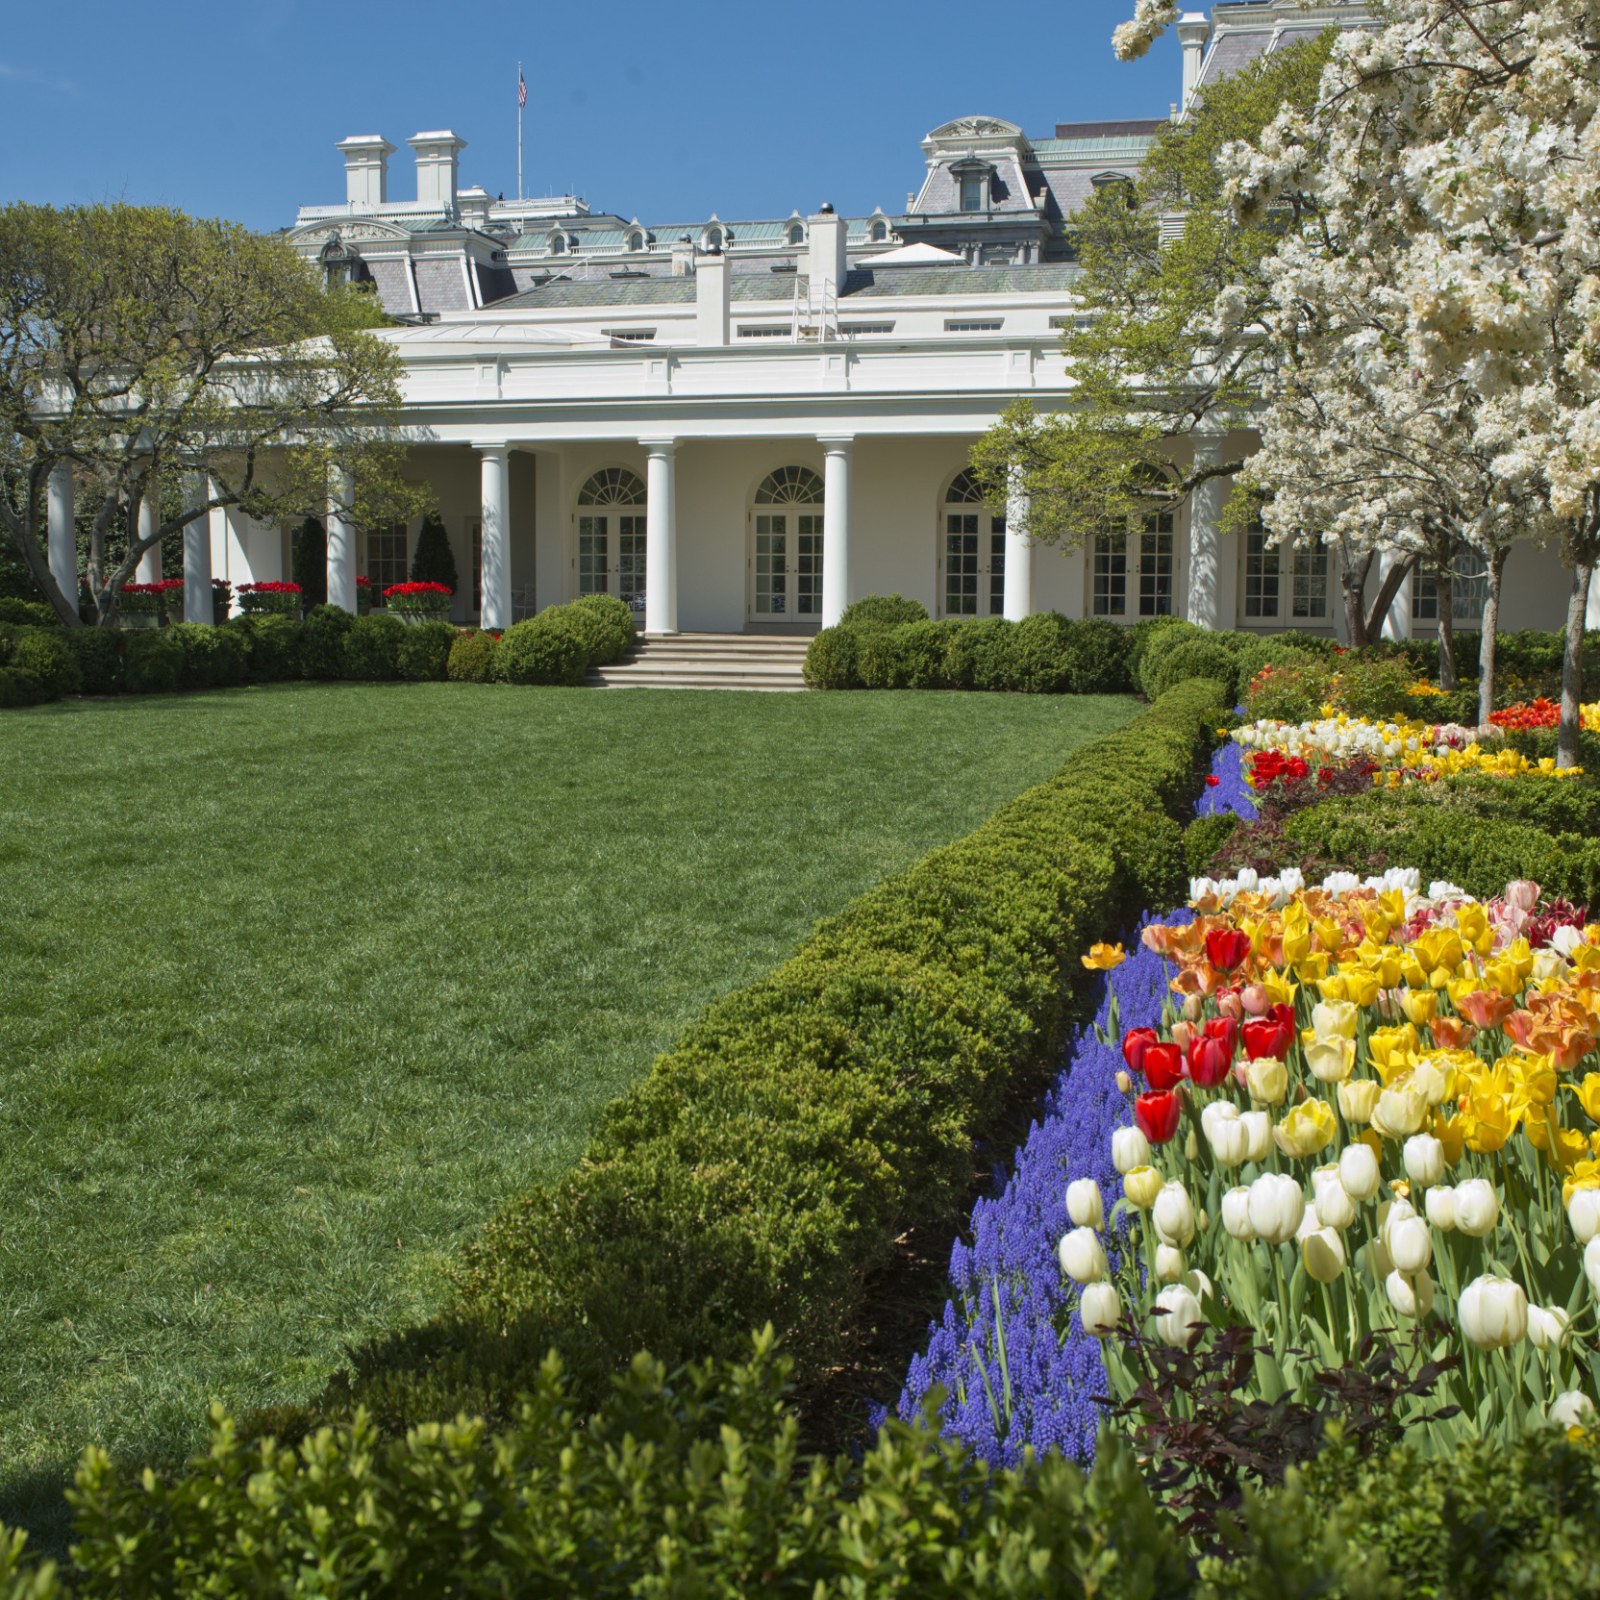 White House Rose Garden Over 60 Years—Pictures From 1961 to 2021